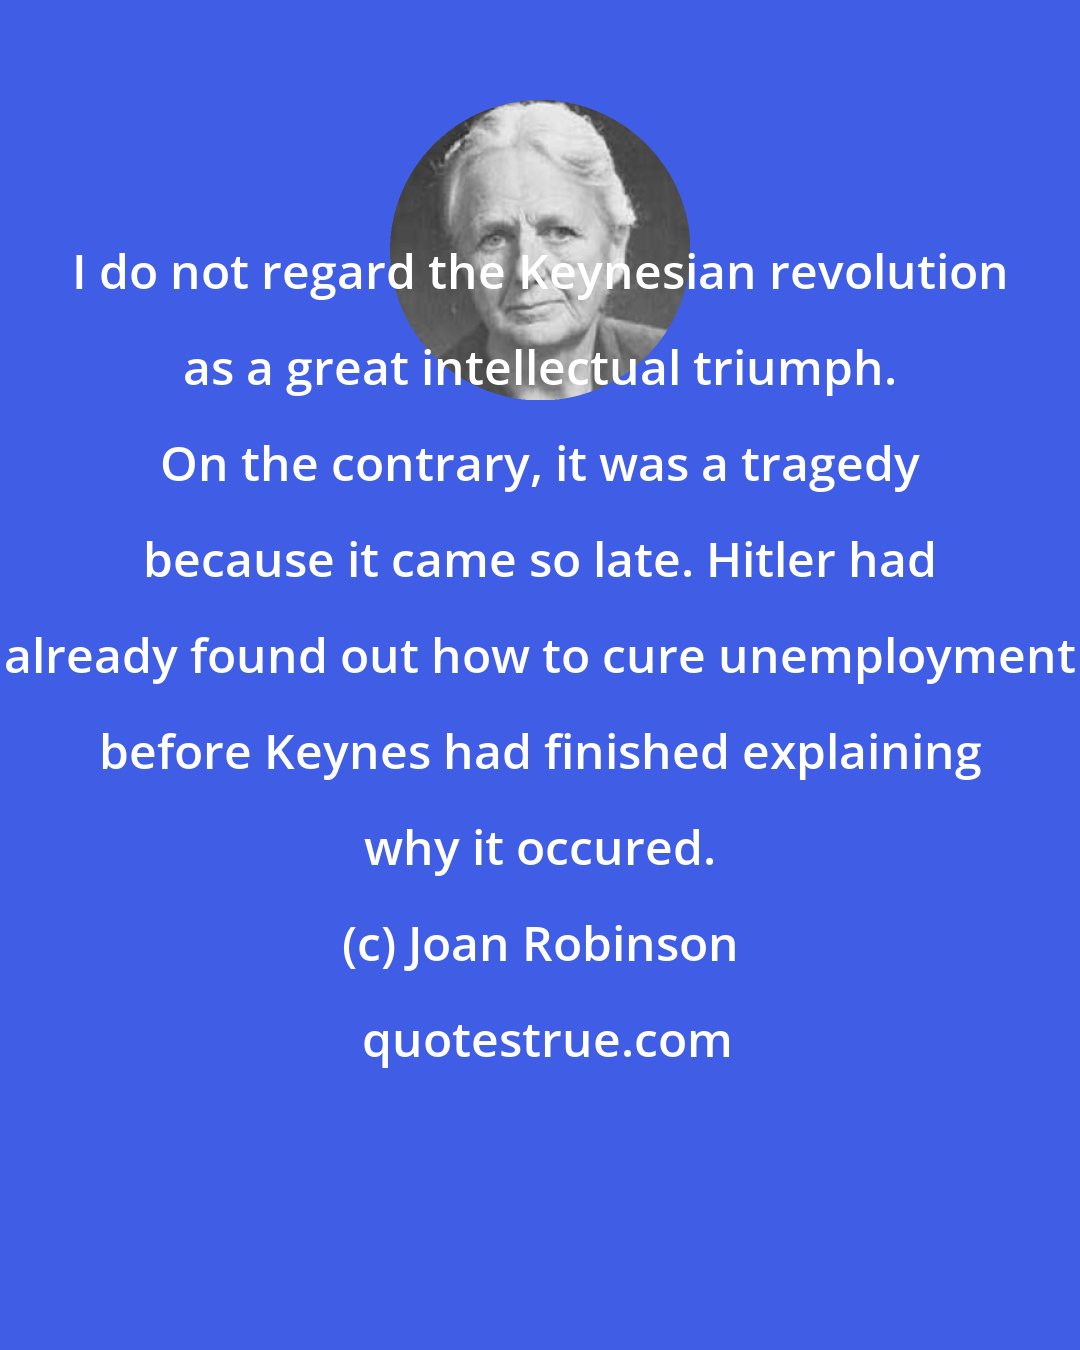 Joan Robinson: I do not regard the Keynesian revolution as a great intellectual triumph. On the contrary, it was a tragedy because it came so late. Hitler had already found out how to cure unemployment before Keynes had finished explaining why it occured.